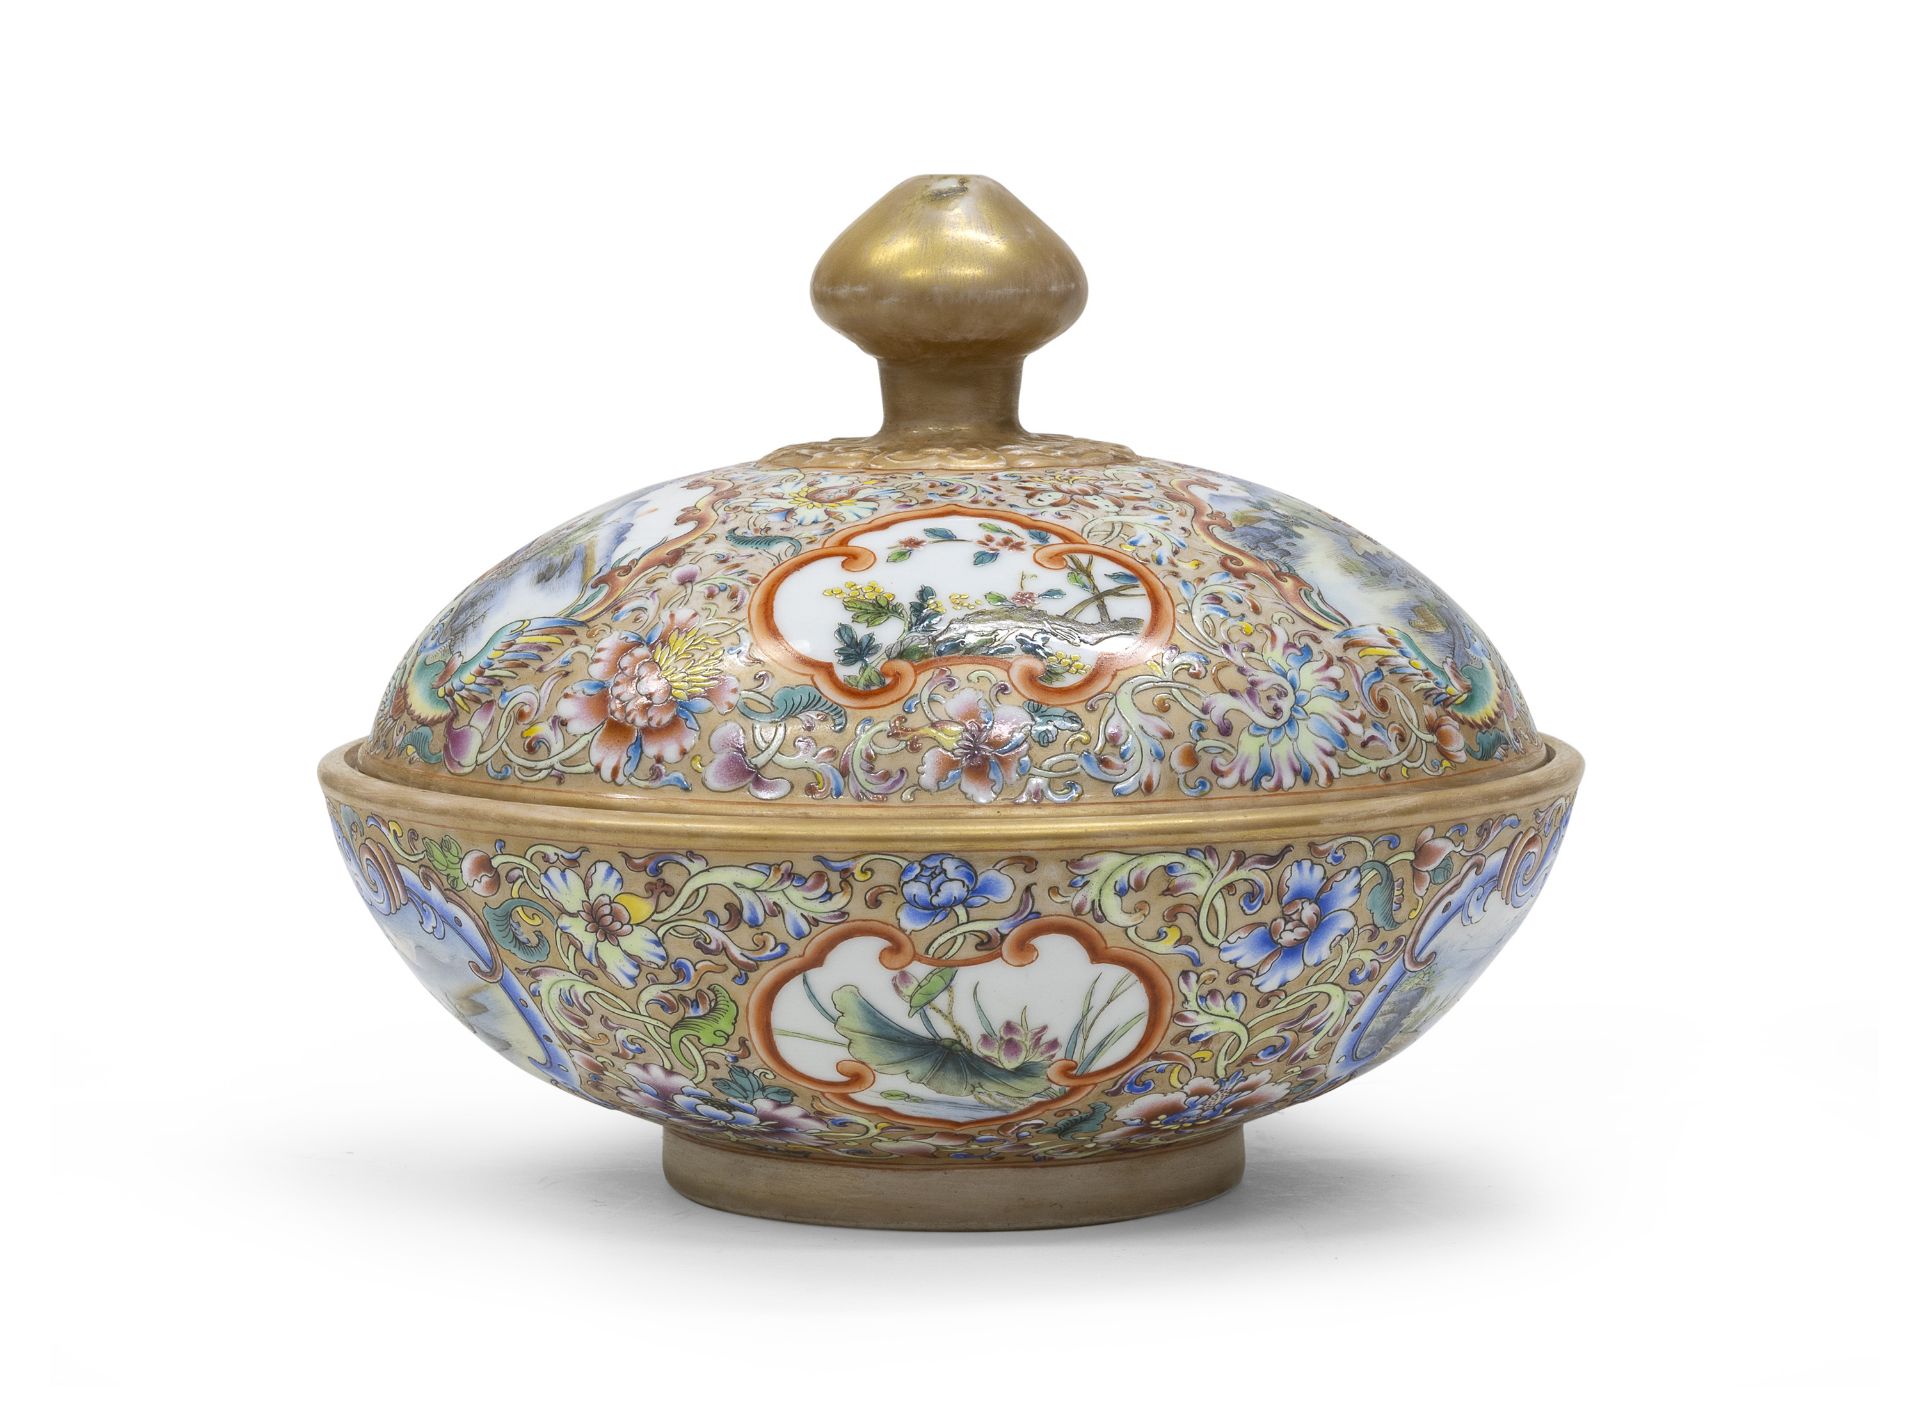 A CHINESE POLYCHROME AND GOLD ENAMELED PORCELAIN TUREEN FIRST HALF 20TH CENTURY.